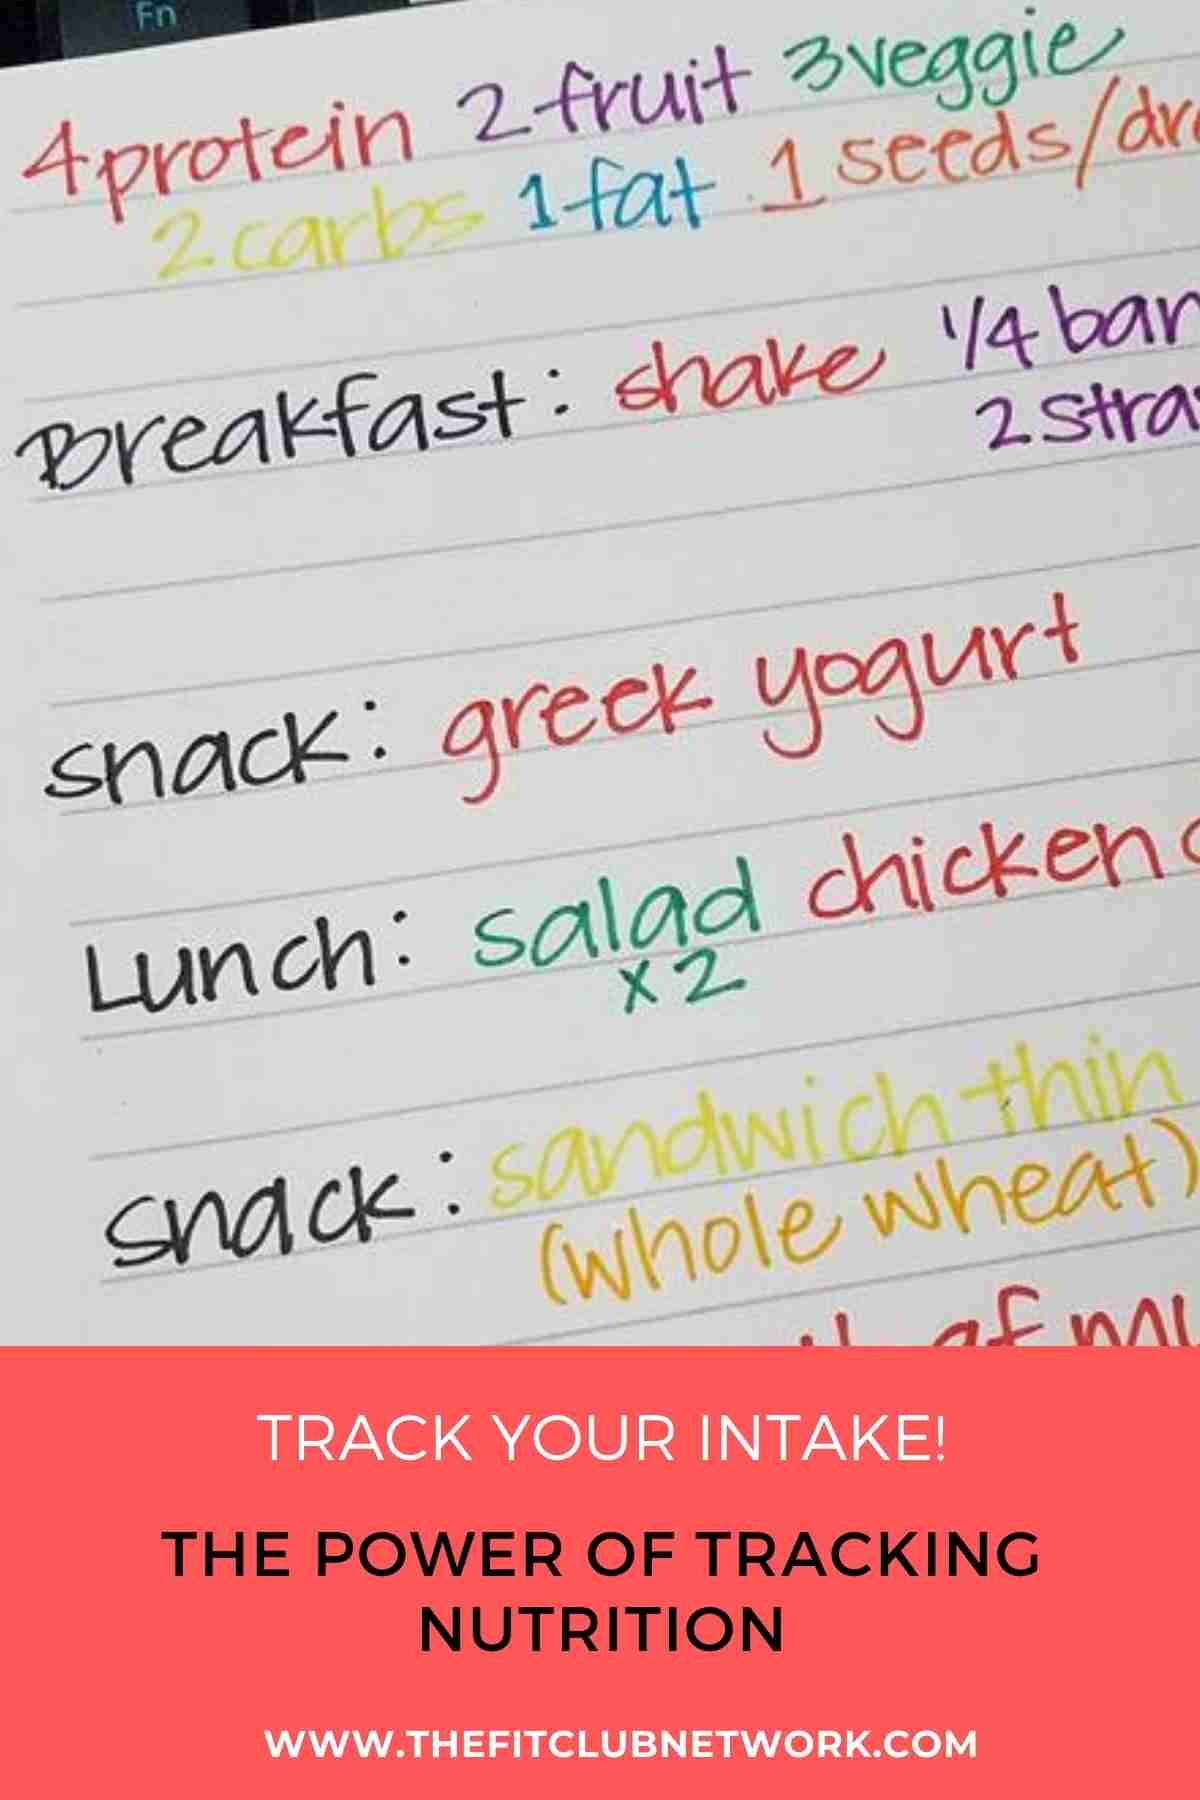 The Power of Tracking Nutrition